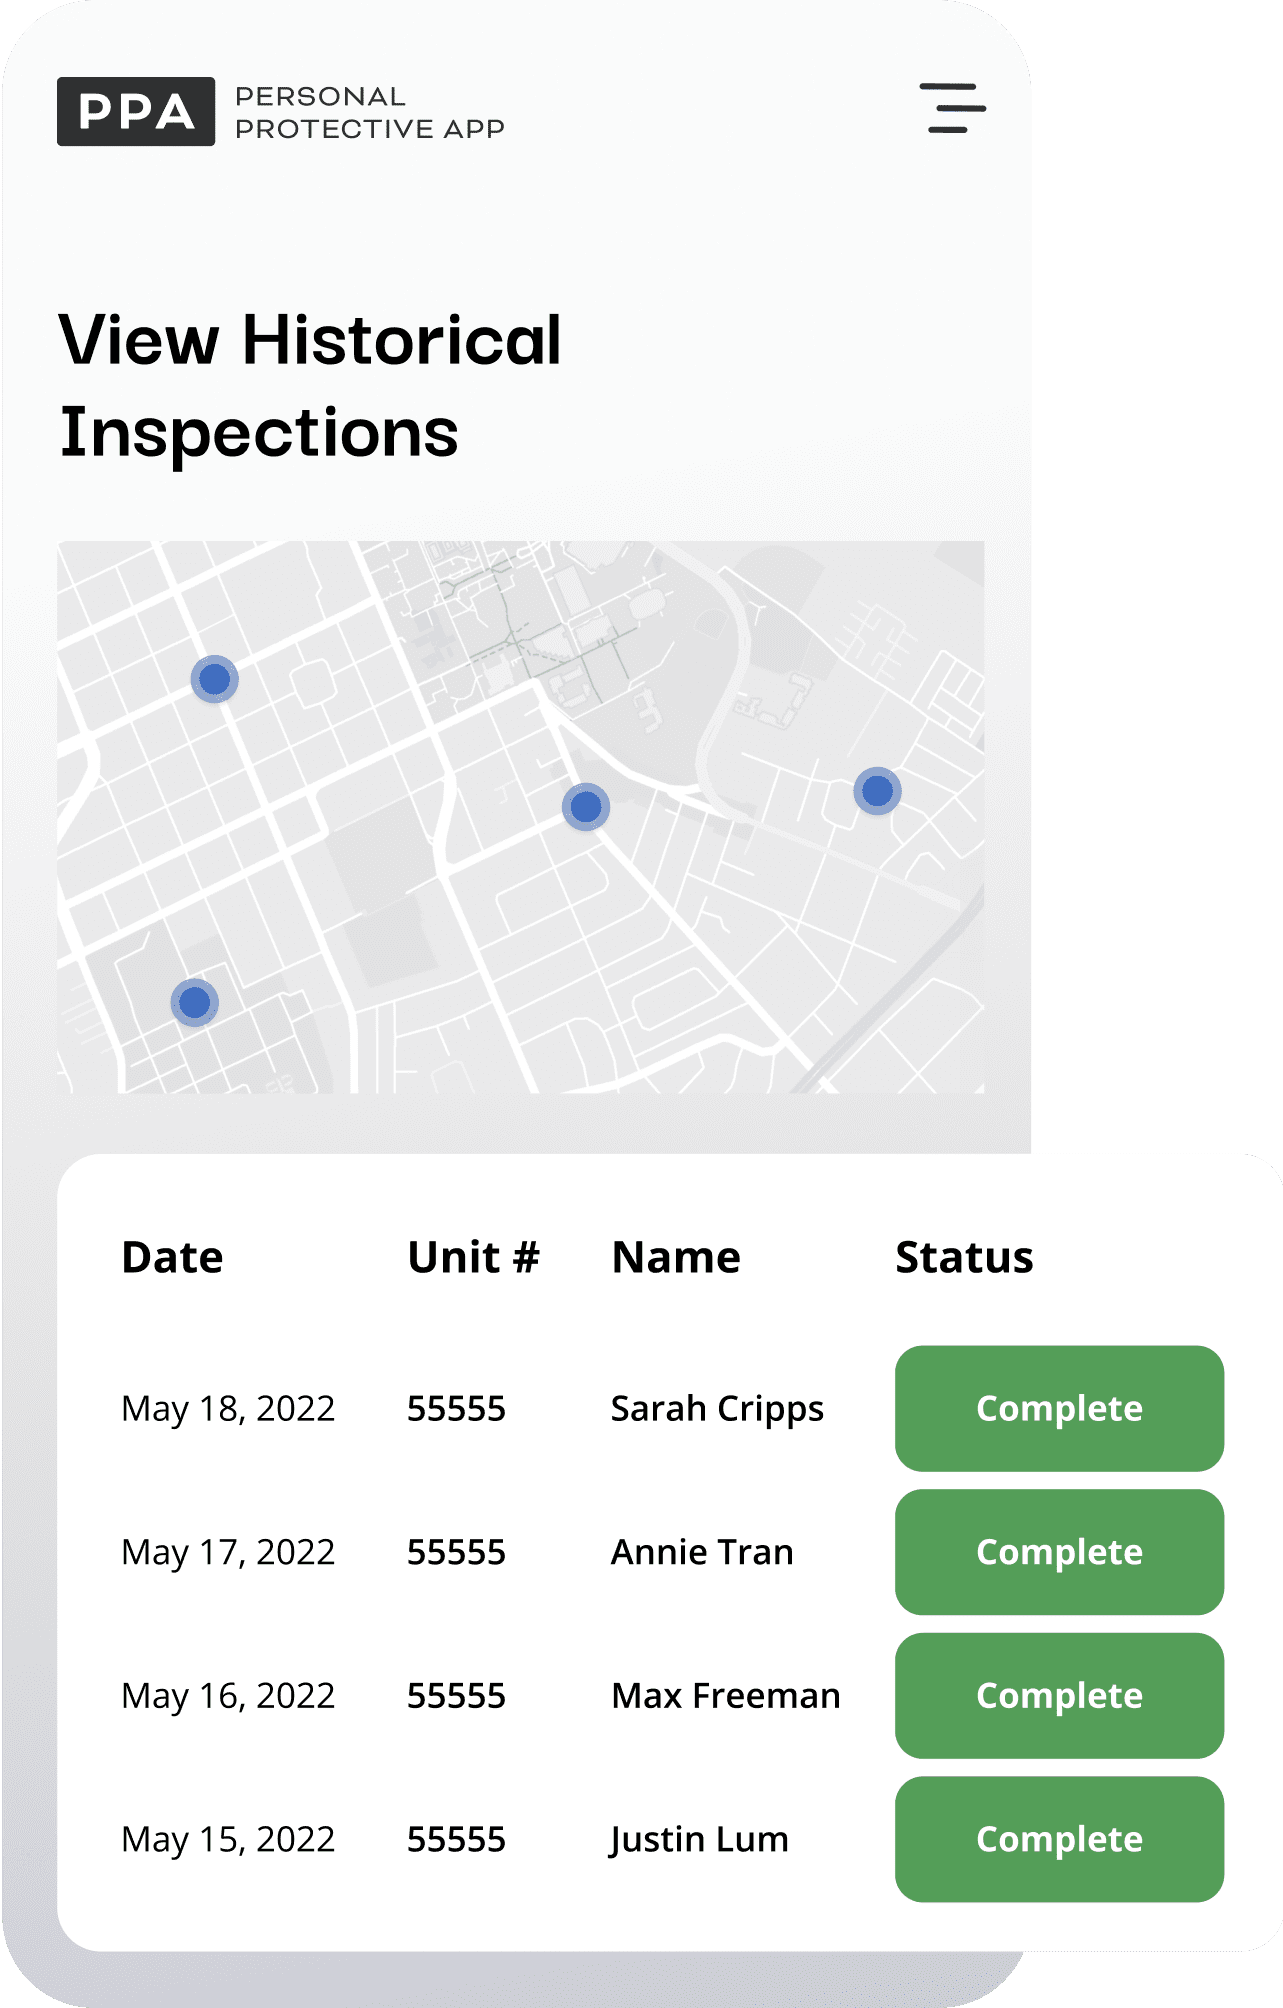 View Historical Inspections 1